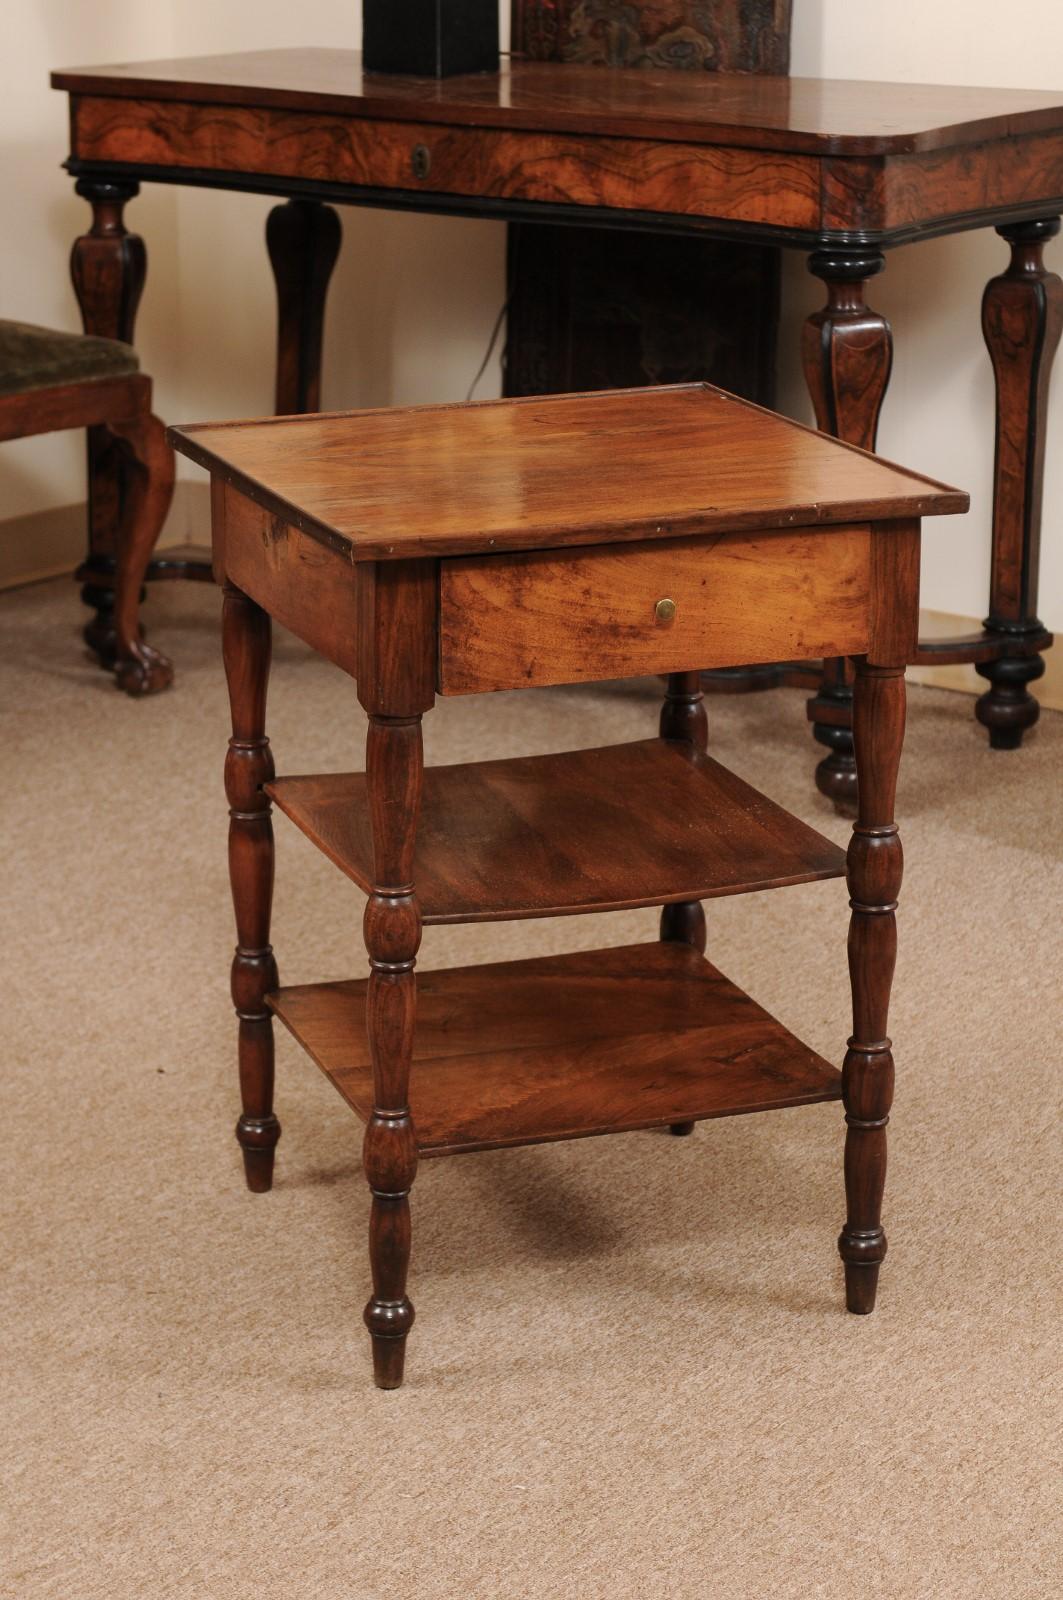 The Louis Philippe French walnut square side table with 1 drawer, 2 lower shelves and turned legs.